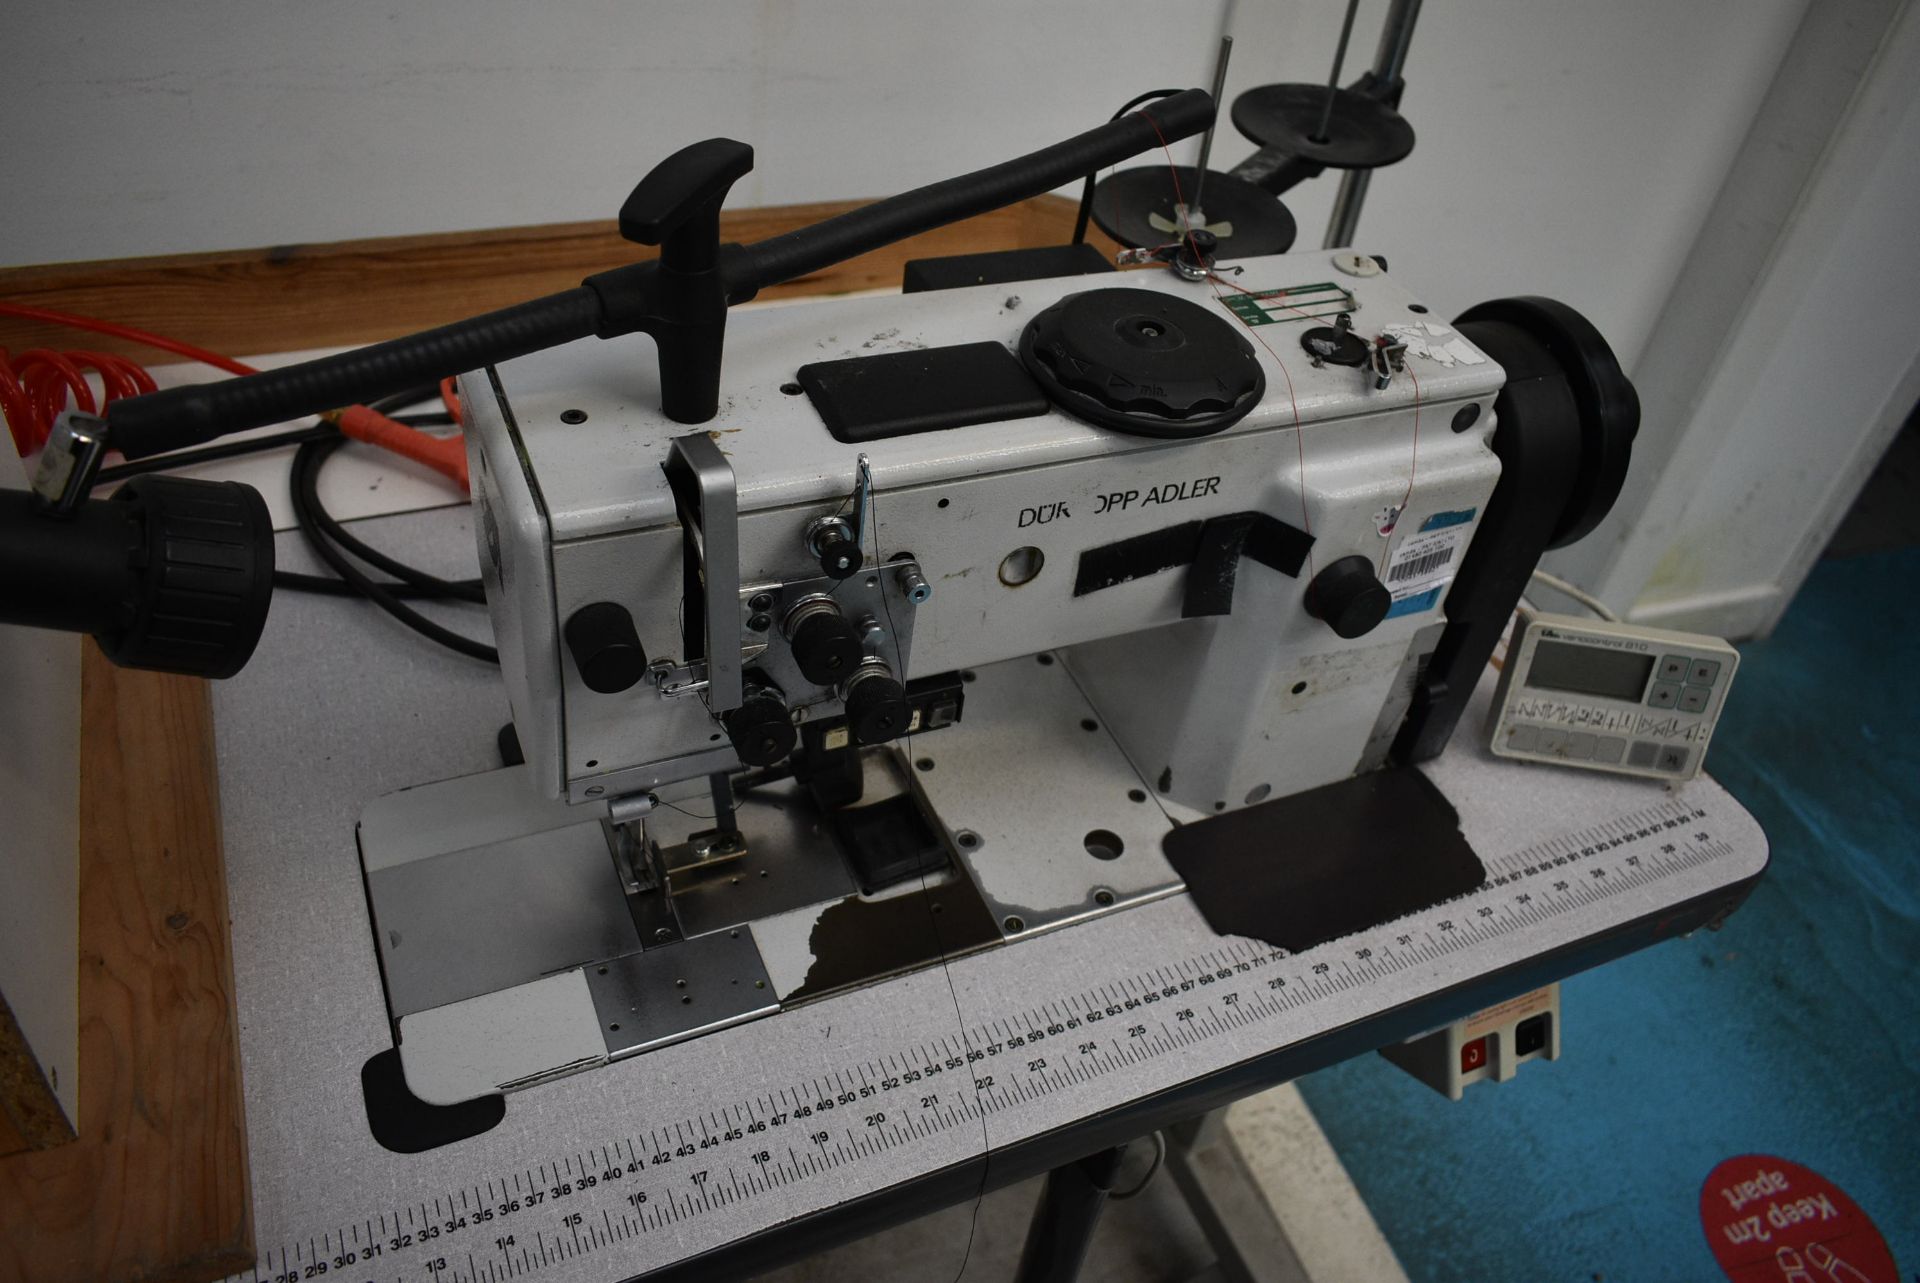 Durkopp Adler 0767 990015 767-FA-373-RAP FLAT BED SEWING MACHINE, serial no. 0767834742, with Efka - Image 3 of 7